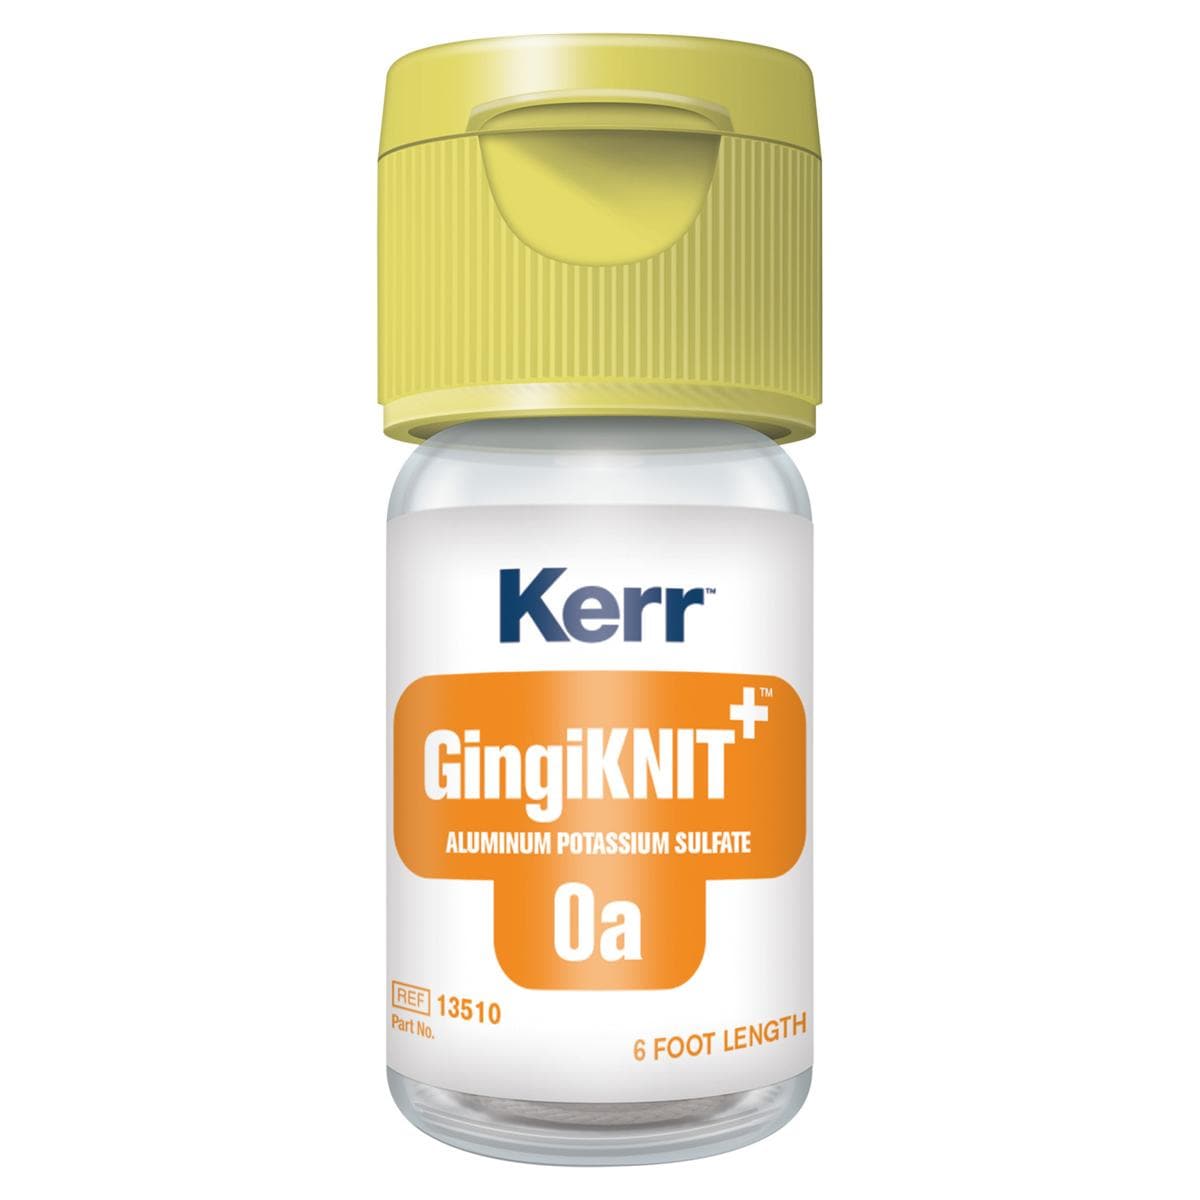 GingKnit+? - non imprgn - 0a